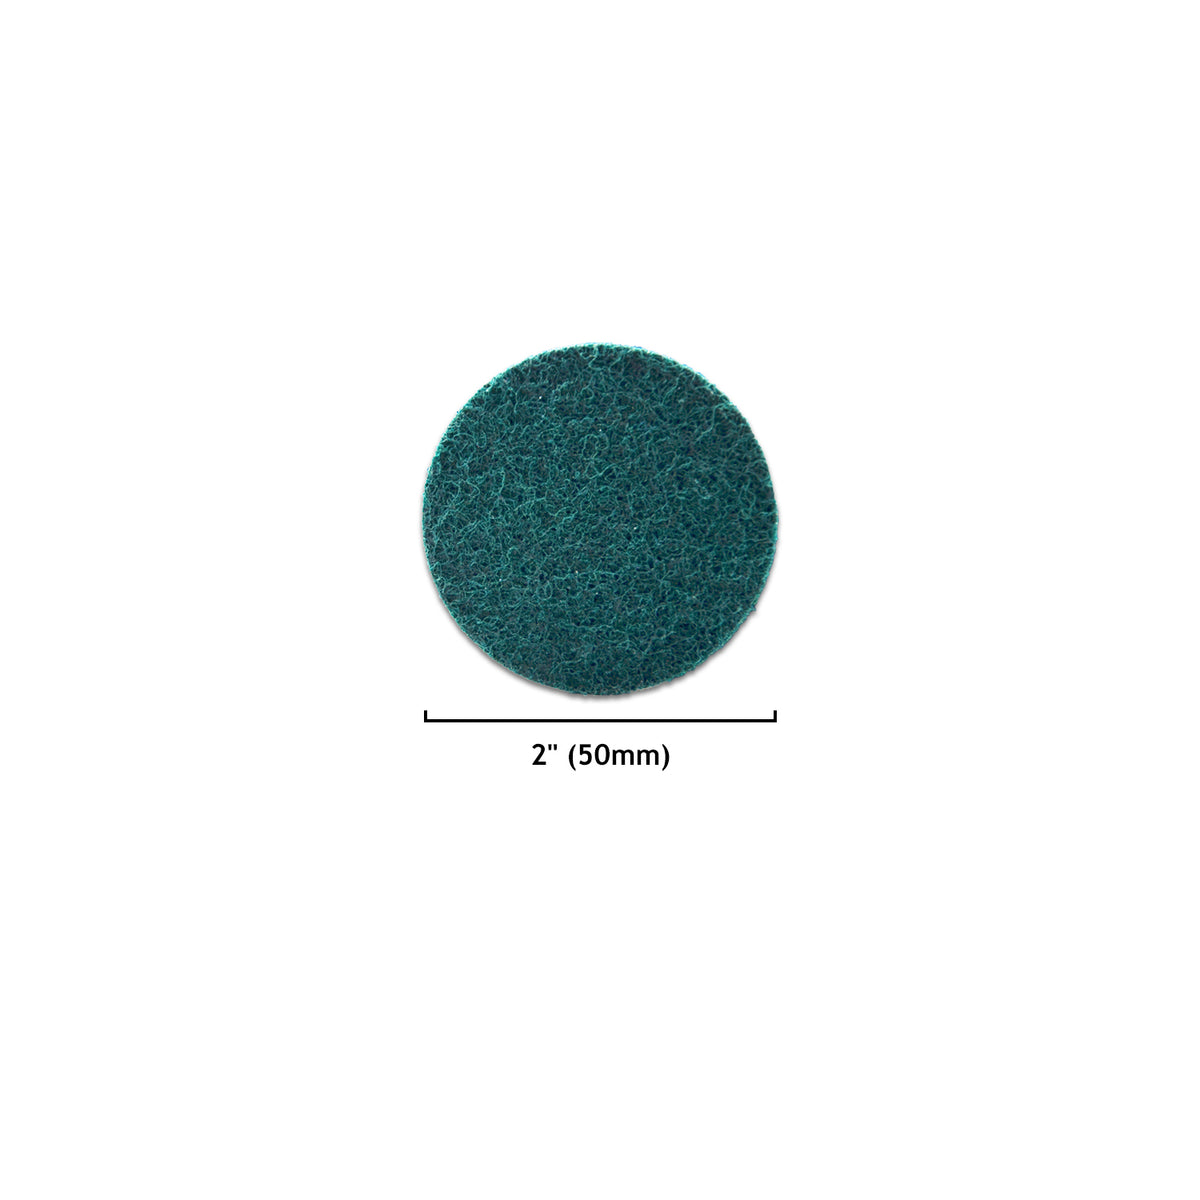 2" (50mm) Round Heavy Duty Hook and Loop Scouring Pads(240-1000 Grit), 1 PC